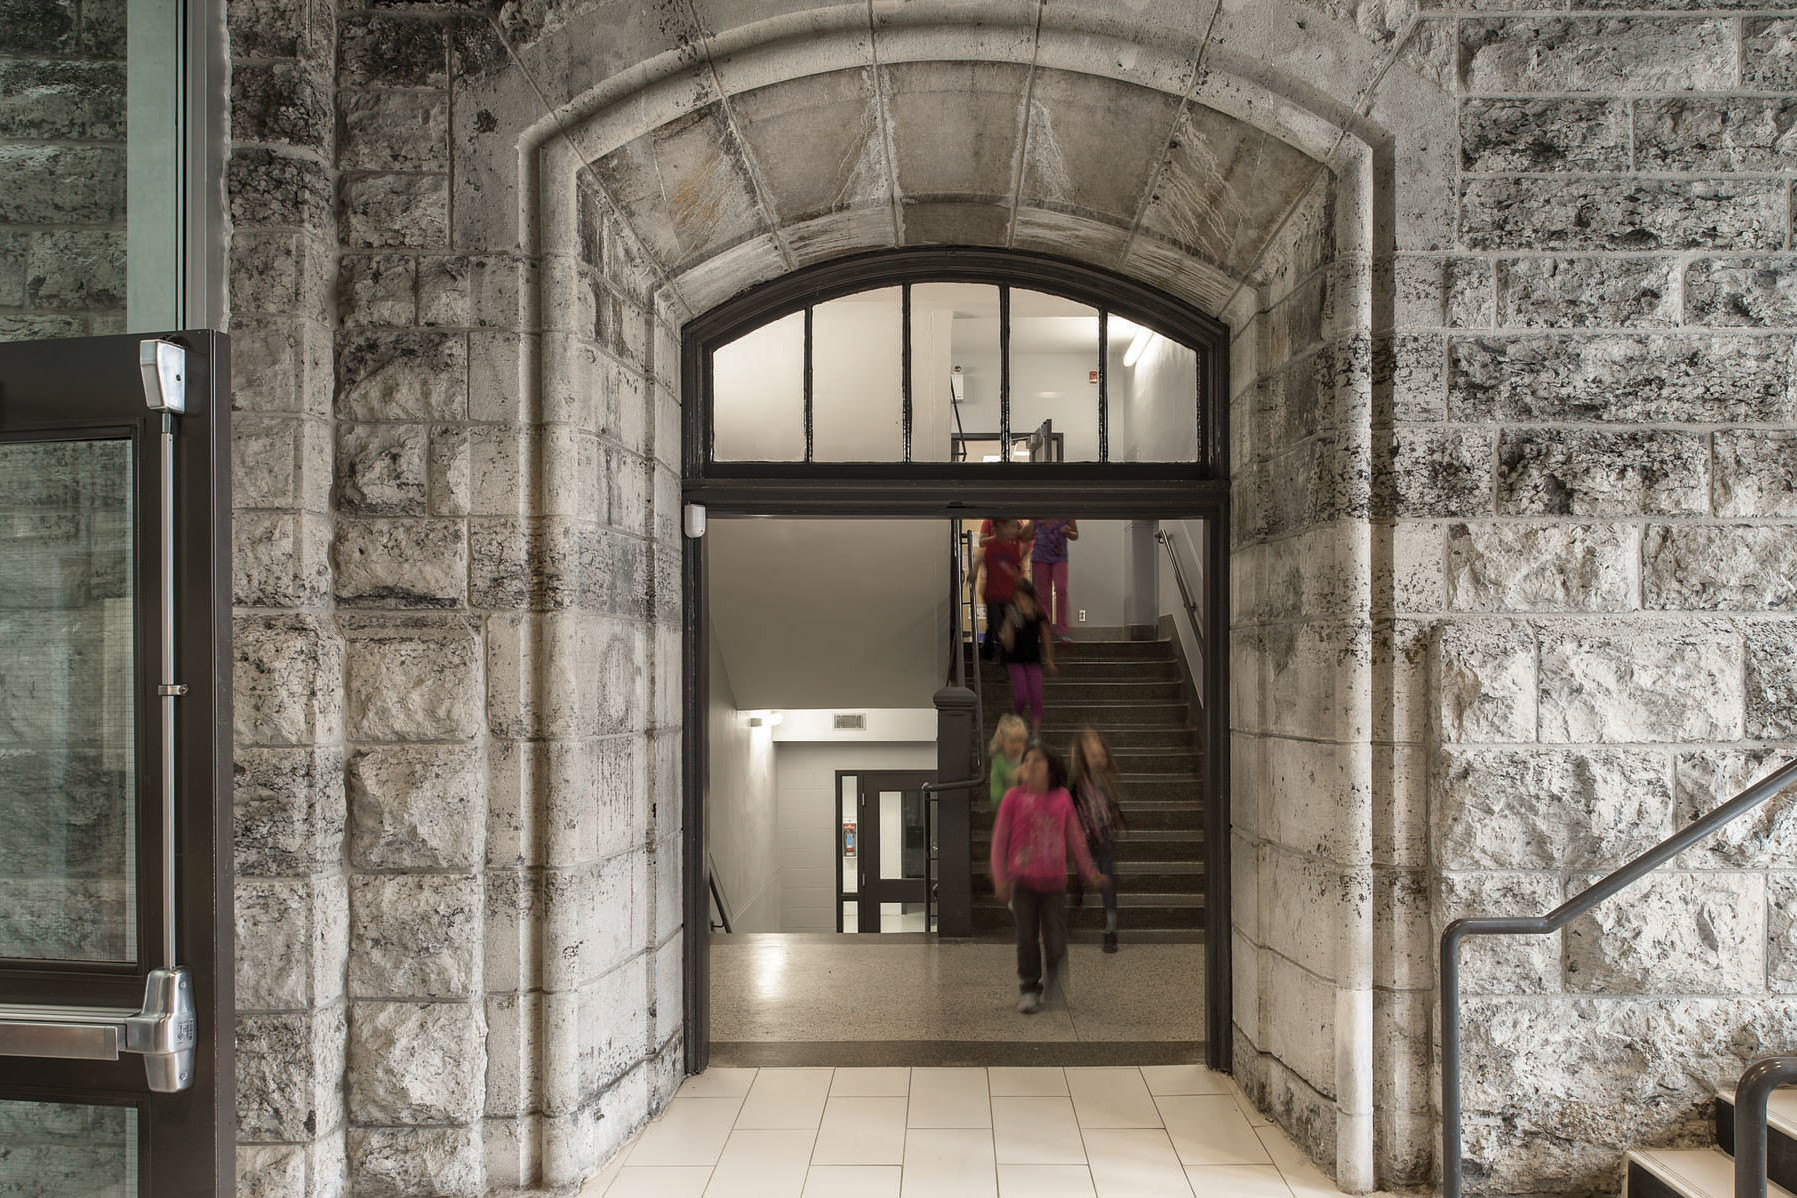 View of students in stairwell through archway in original stone façade from corridor in new addition